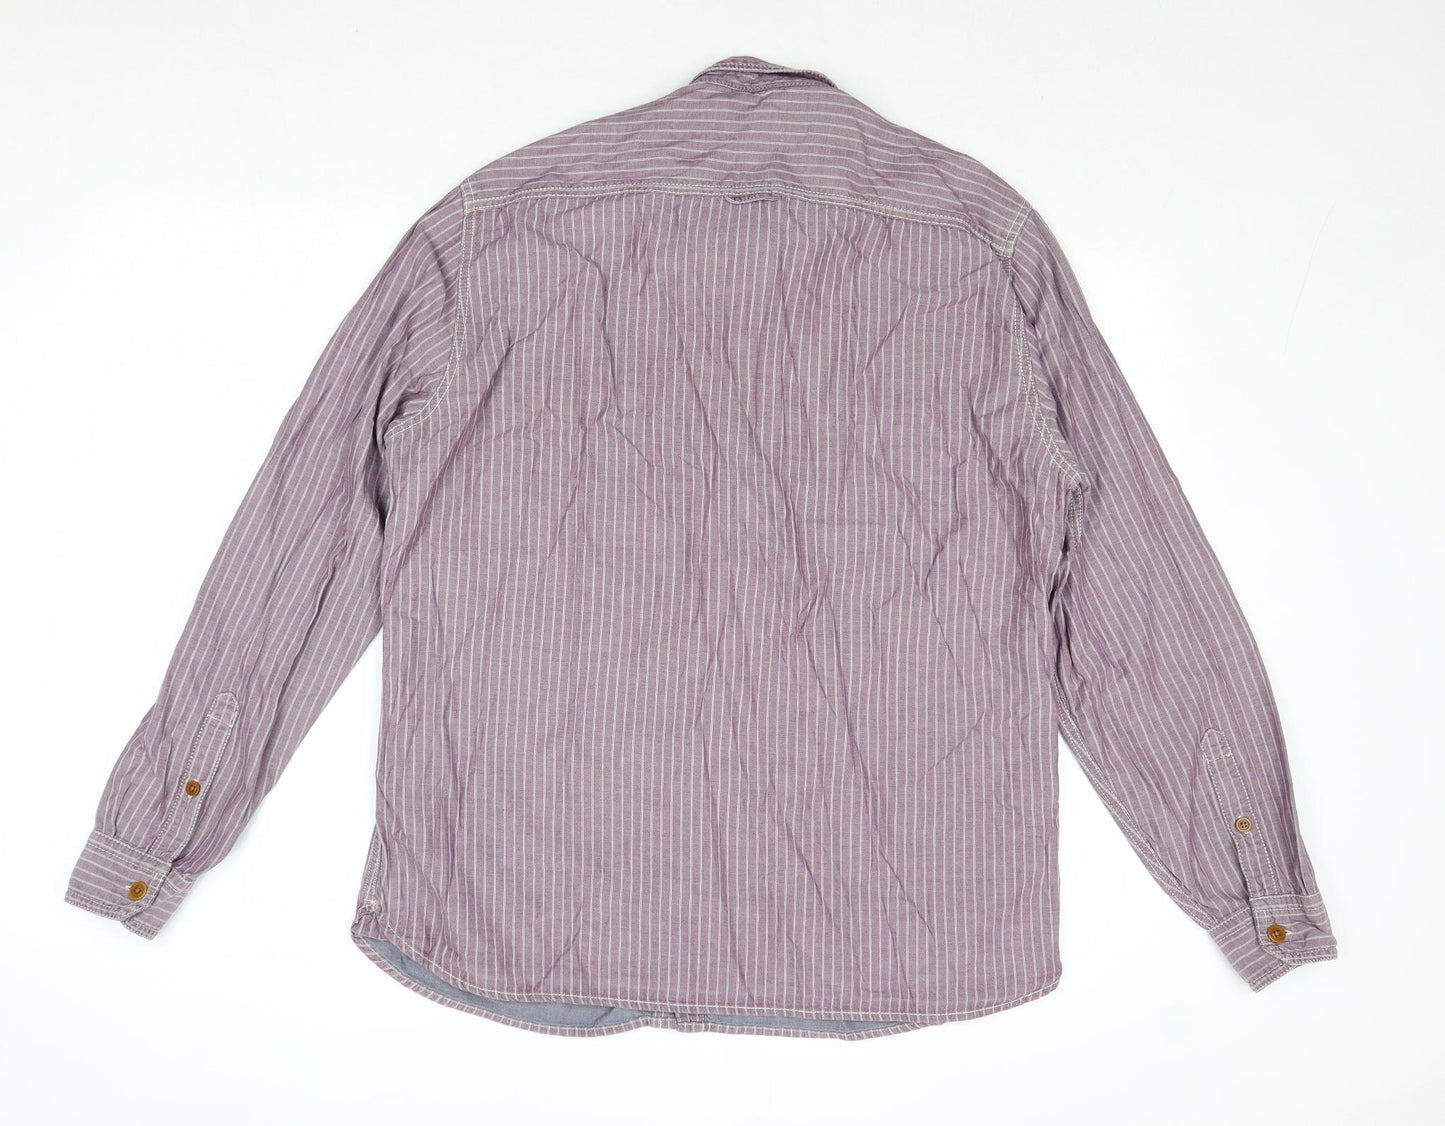 Marks and Spencer Mens Purple Striped Cotton Button-Up Size L Collared Button